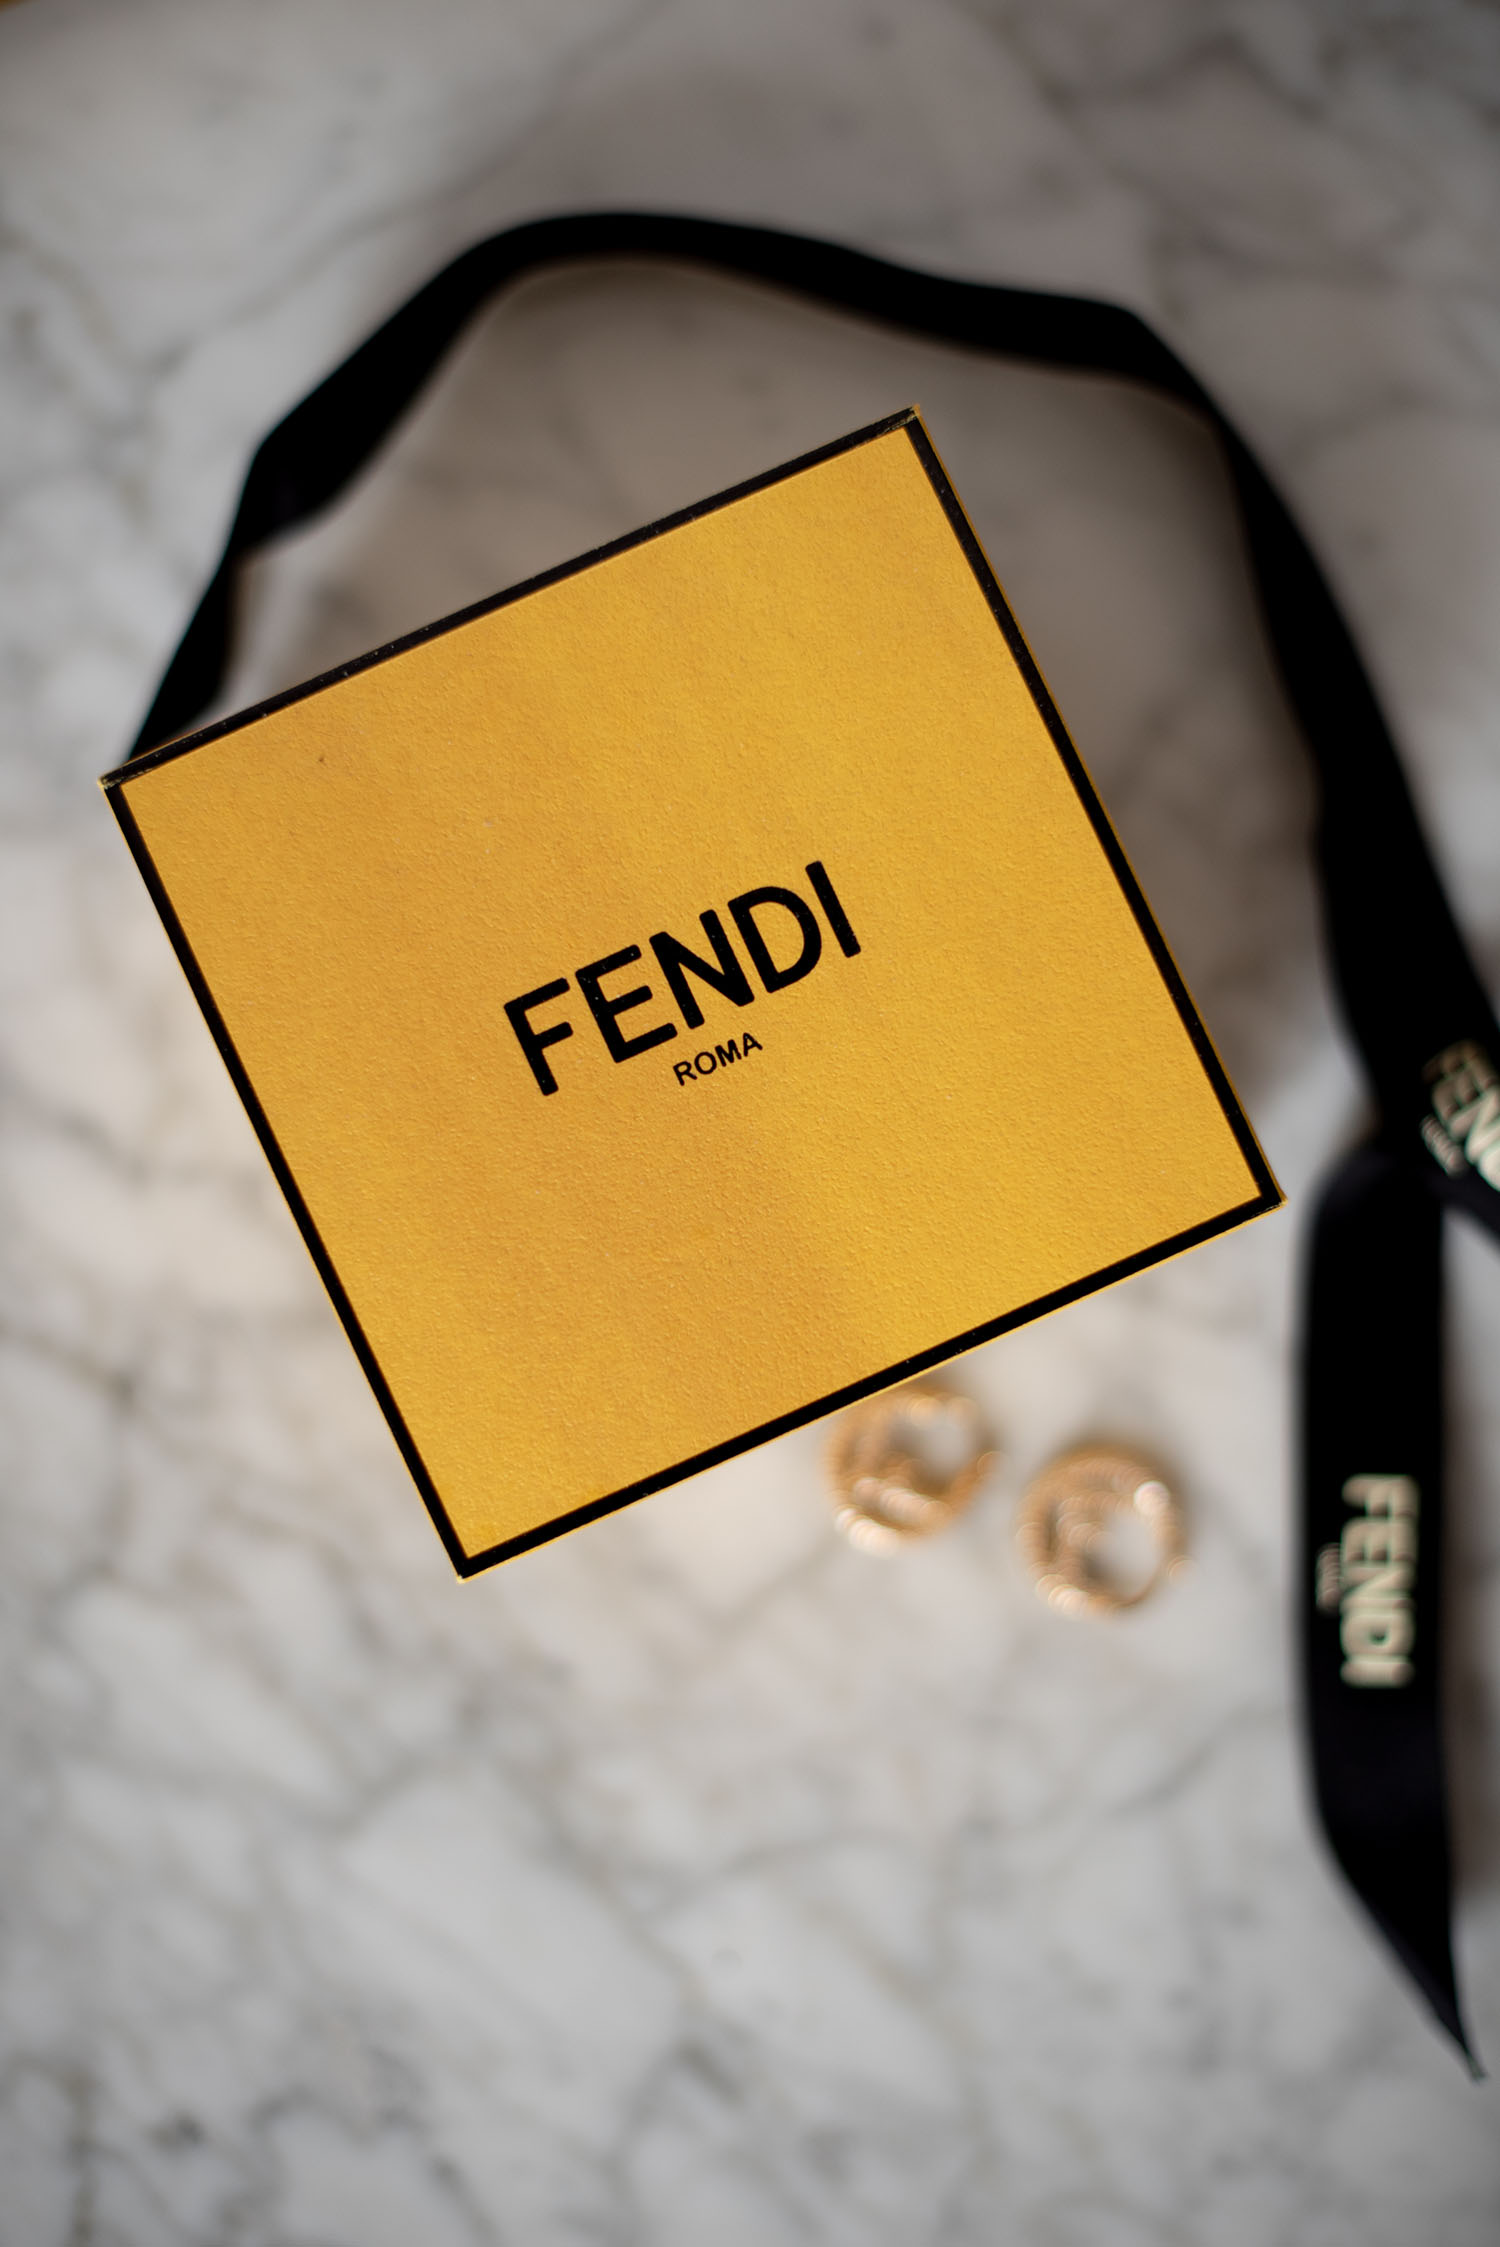 Coco & Vera - Fendi Roma earring box with Fendi ribbon and earrings on marble background